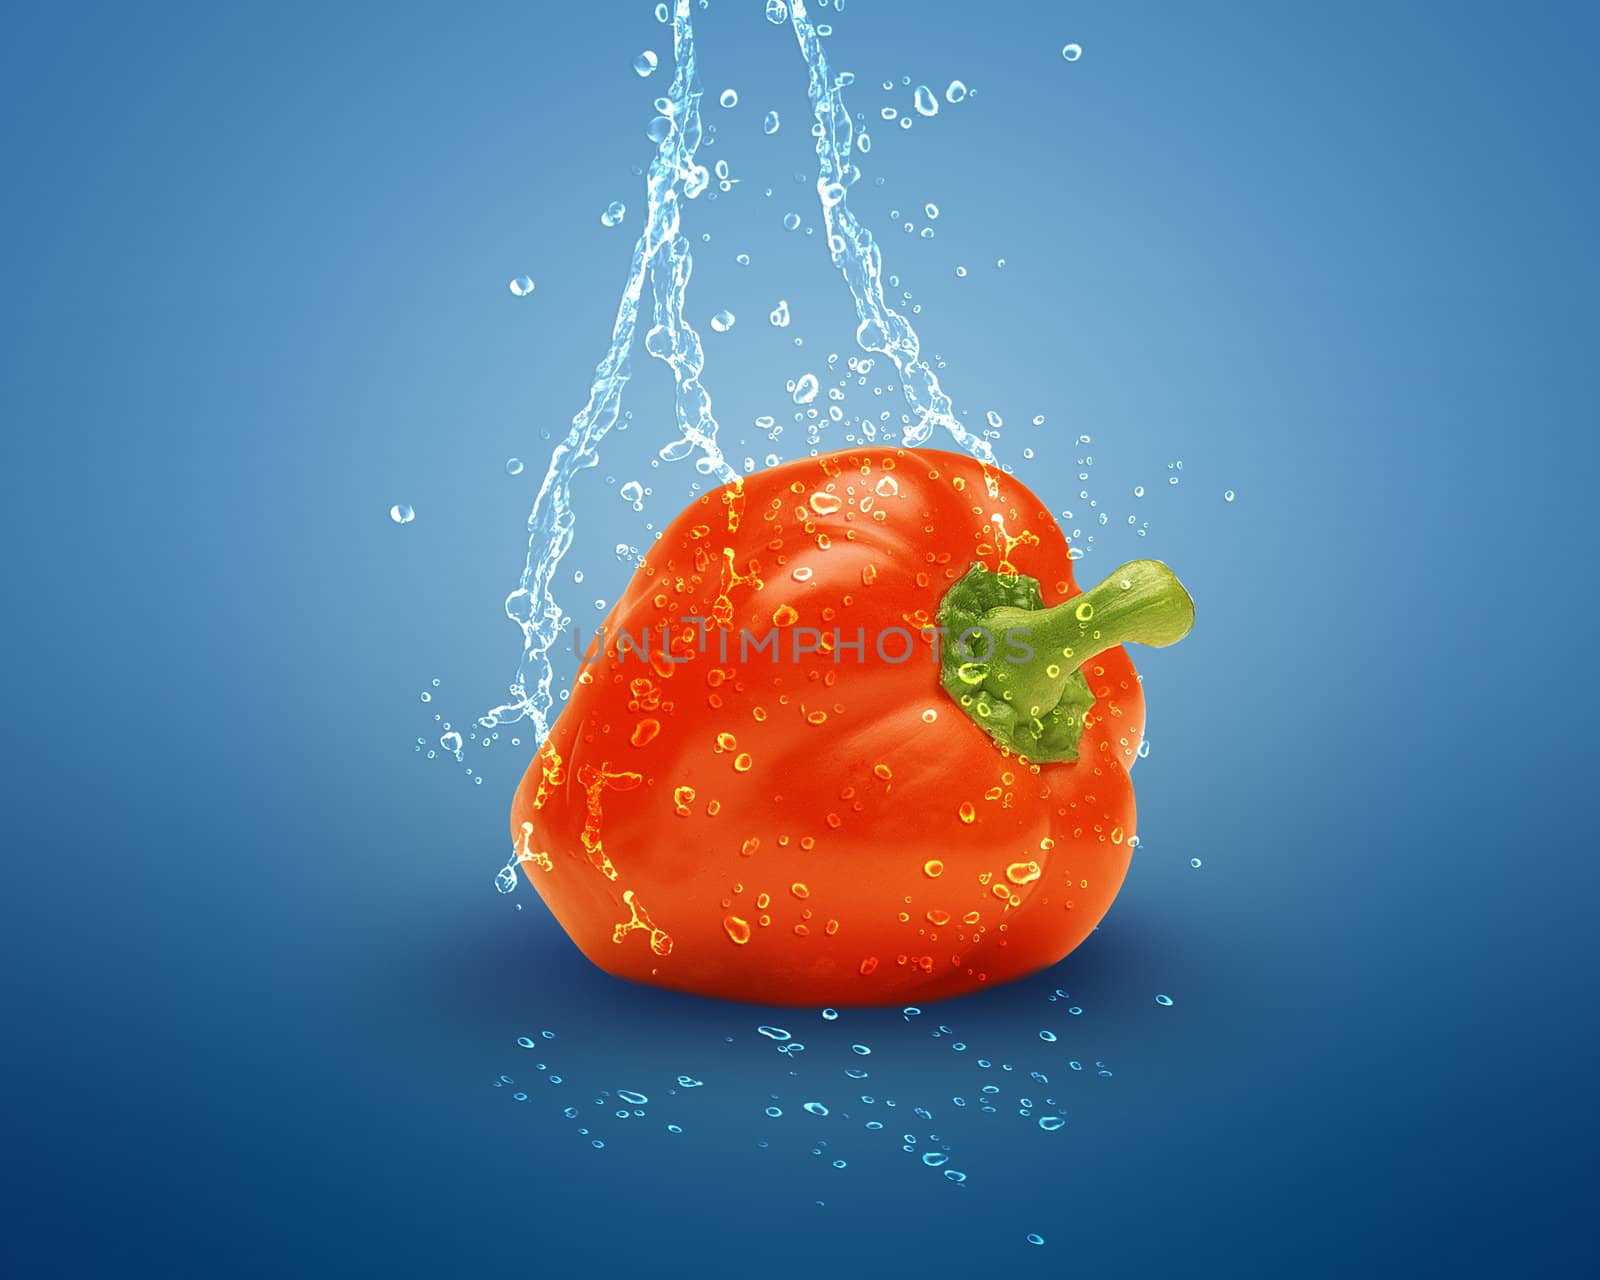 Fresh red bell pepper with water splashes on blue background.